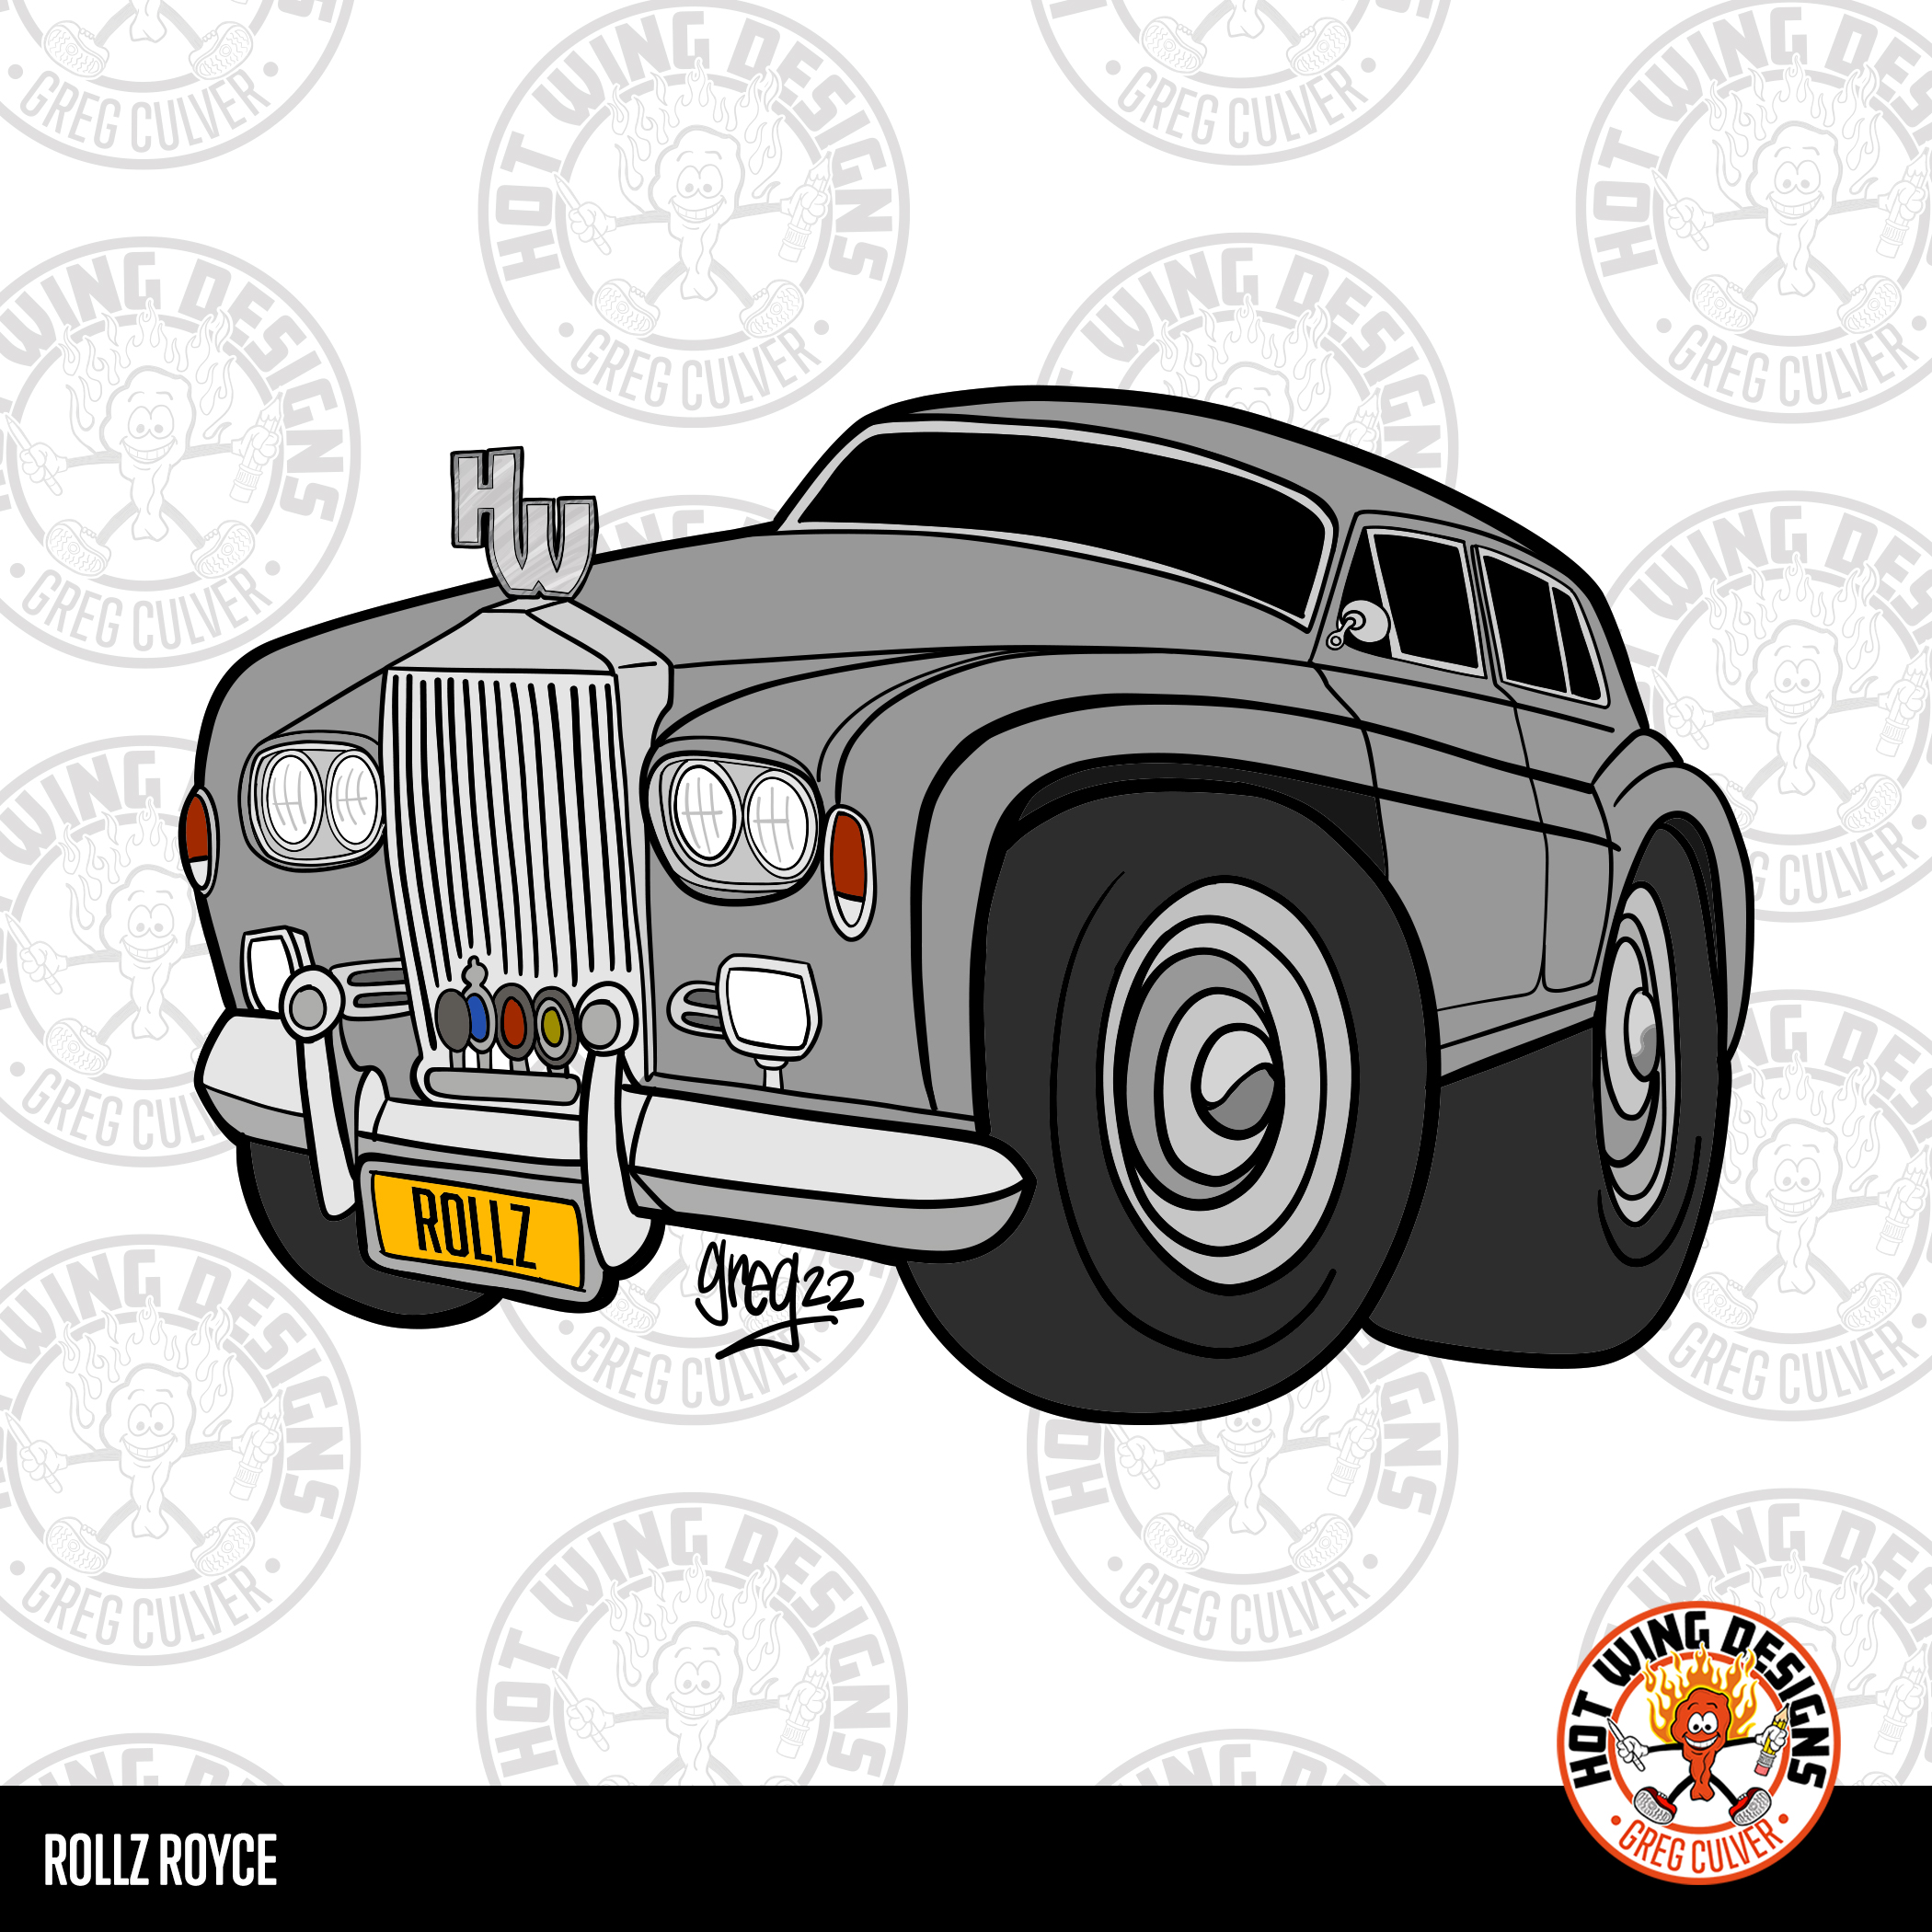 Rolls Royce cartoon by Greg Culver and Hot Wing Designs